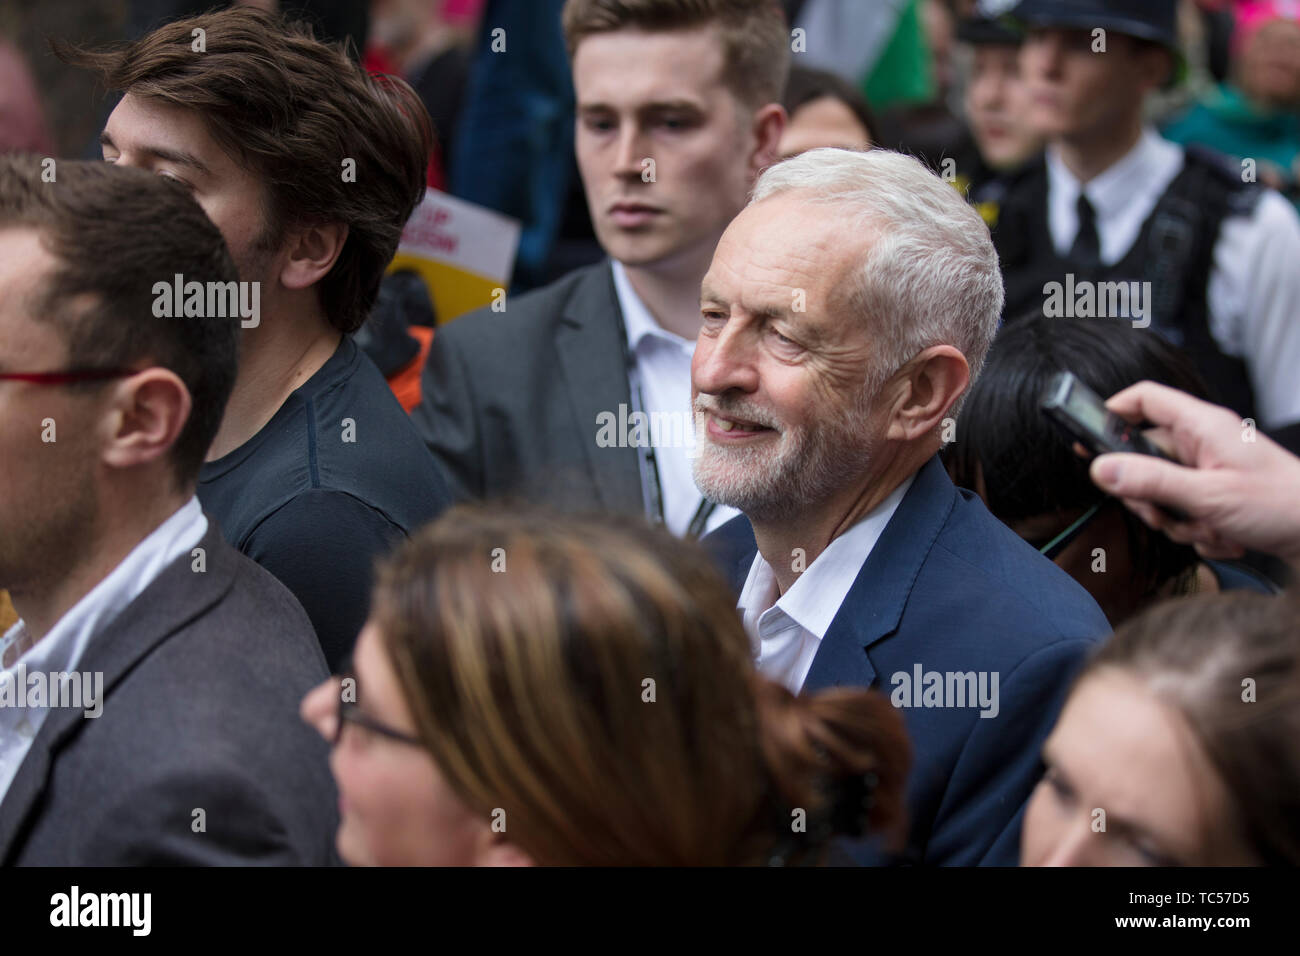 LONDON, UK - June 4th 2019: Jeremy Corbyn the leader of the Labour political party surrounded by people at a political protest Stock Photo